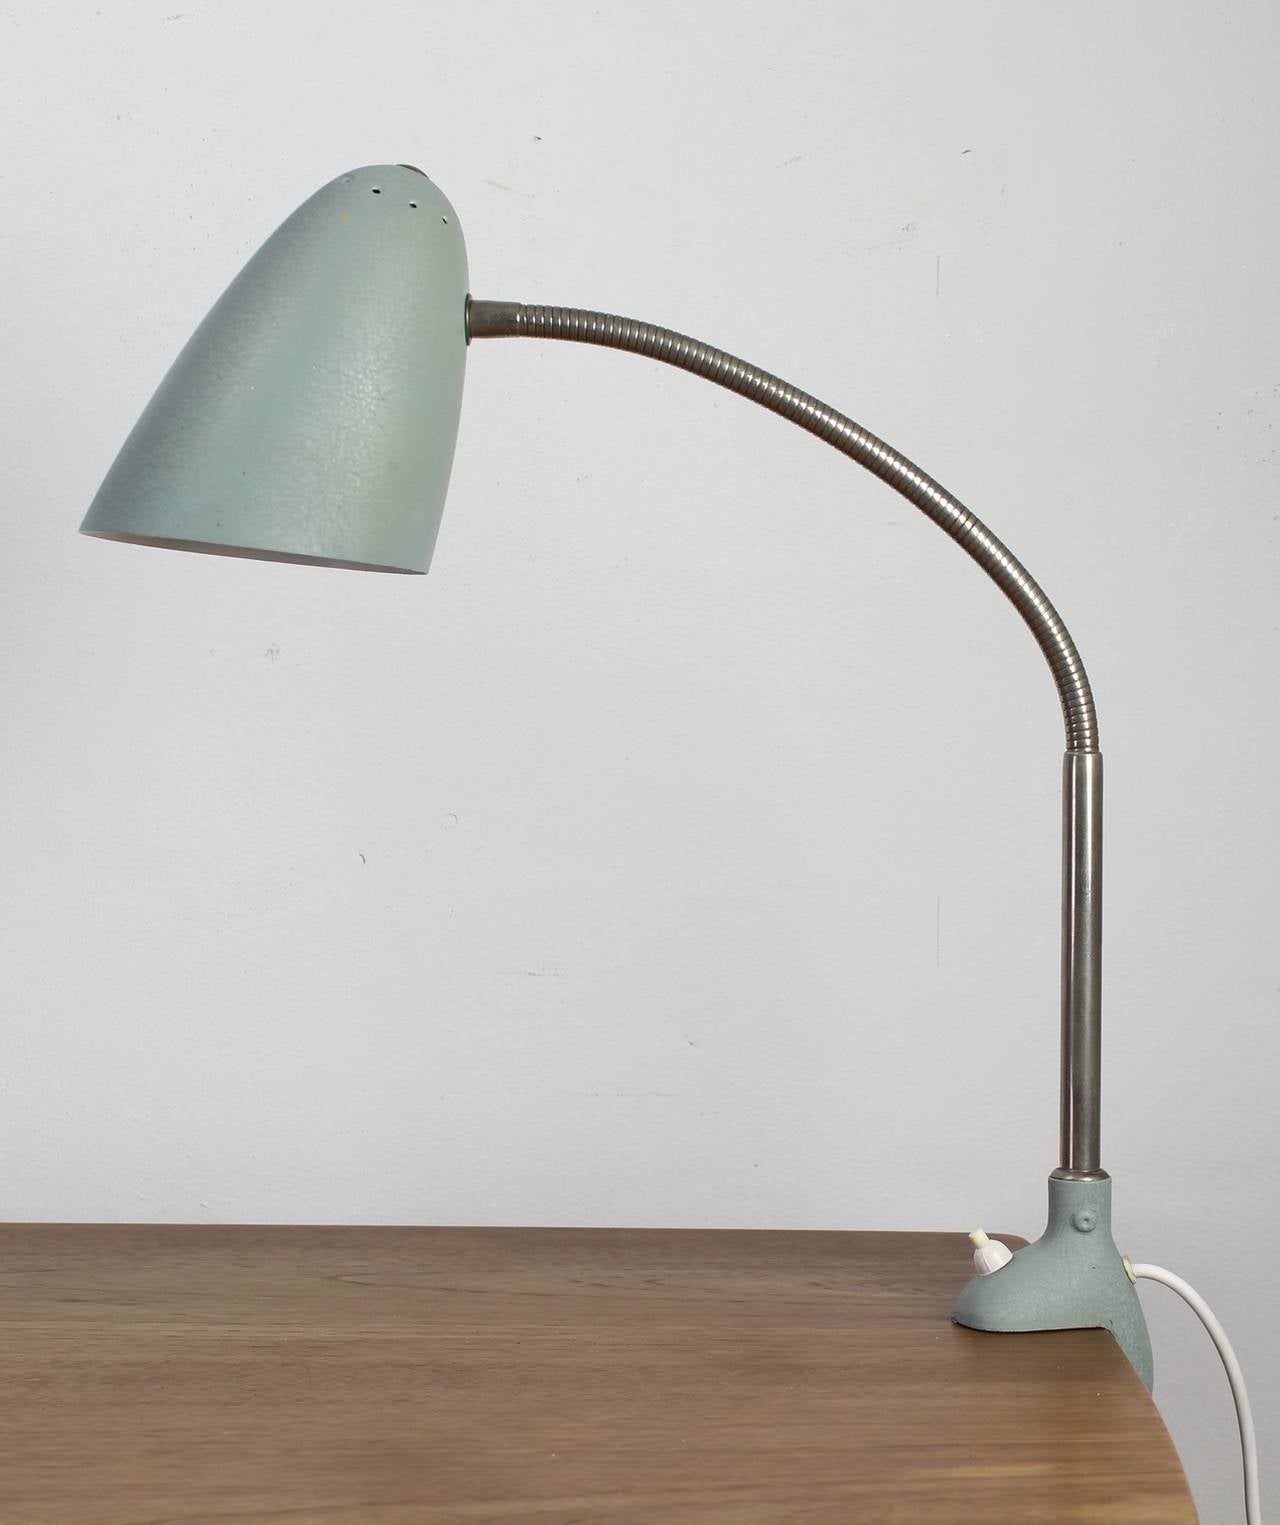 Typical pastell colored desk lamp
Design and manufacturer: Kaiser Leuchten Germany
Nice organic table mount
Flexible chromed metal arm

Express parcel shipment is advised